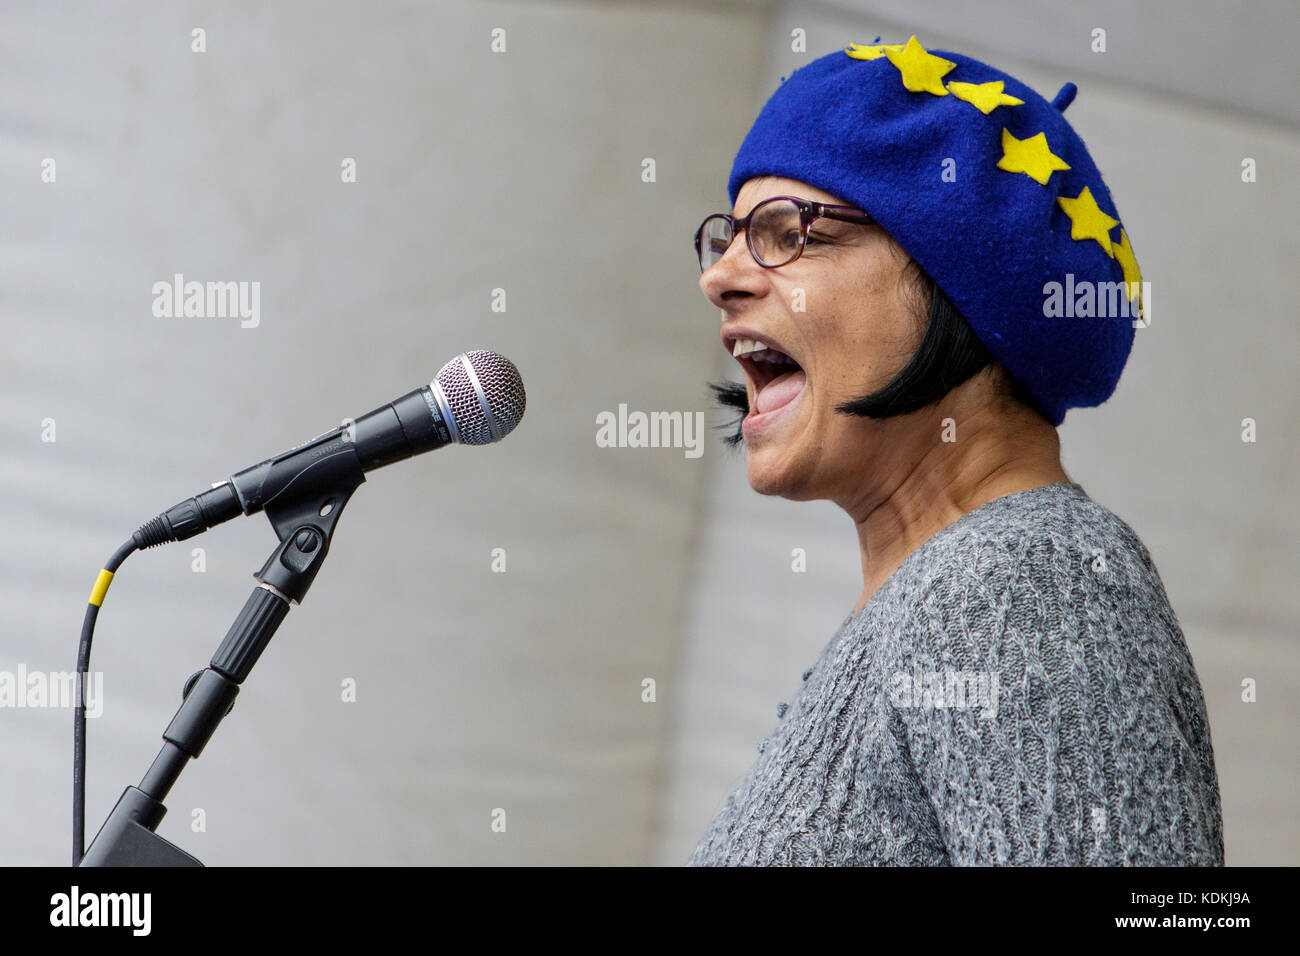 Bristol, UK. 14th Oct, 2017. Thangam Debbonaire Labour MP for Bristol West is pictured as she talks to Pro EU supporters at an anti Brexit protest rally in College Green. The rally was held to allow people to show their support for the UK remaining part of the European Union and to celebrate the South-West and Gibraltar European Parliament Constituency and the benefits that the region enjoys as part of the European Union. Credit: lynchpics/Alamy Live News Stock Photo